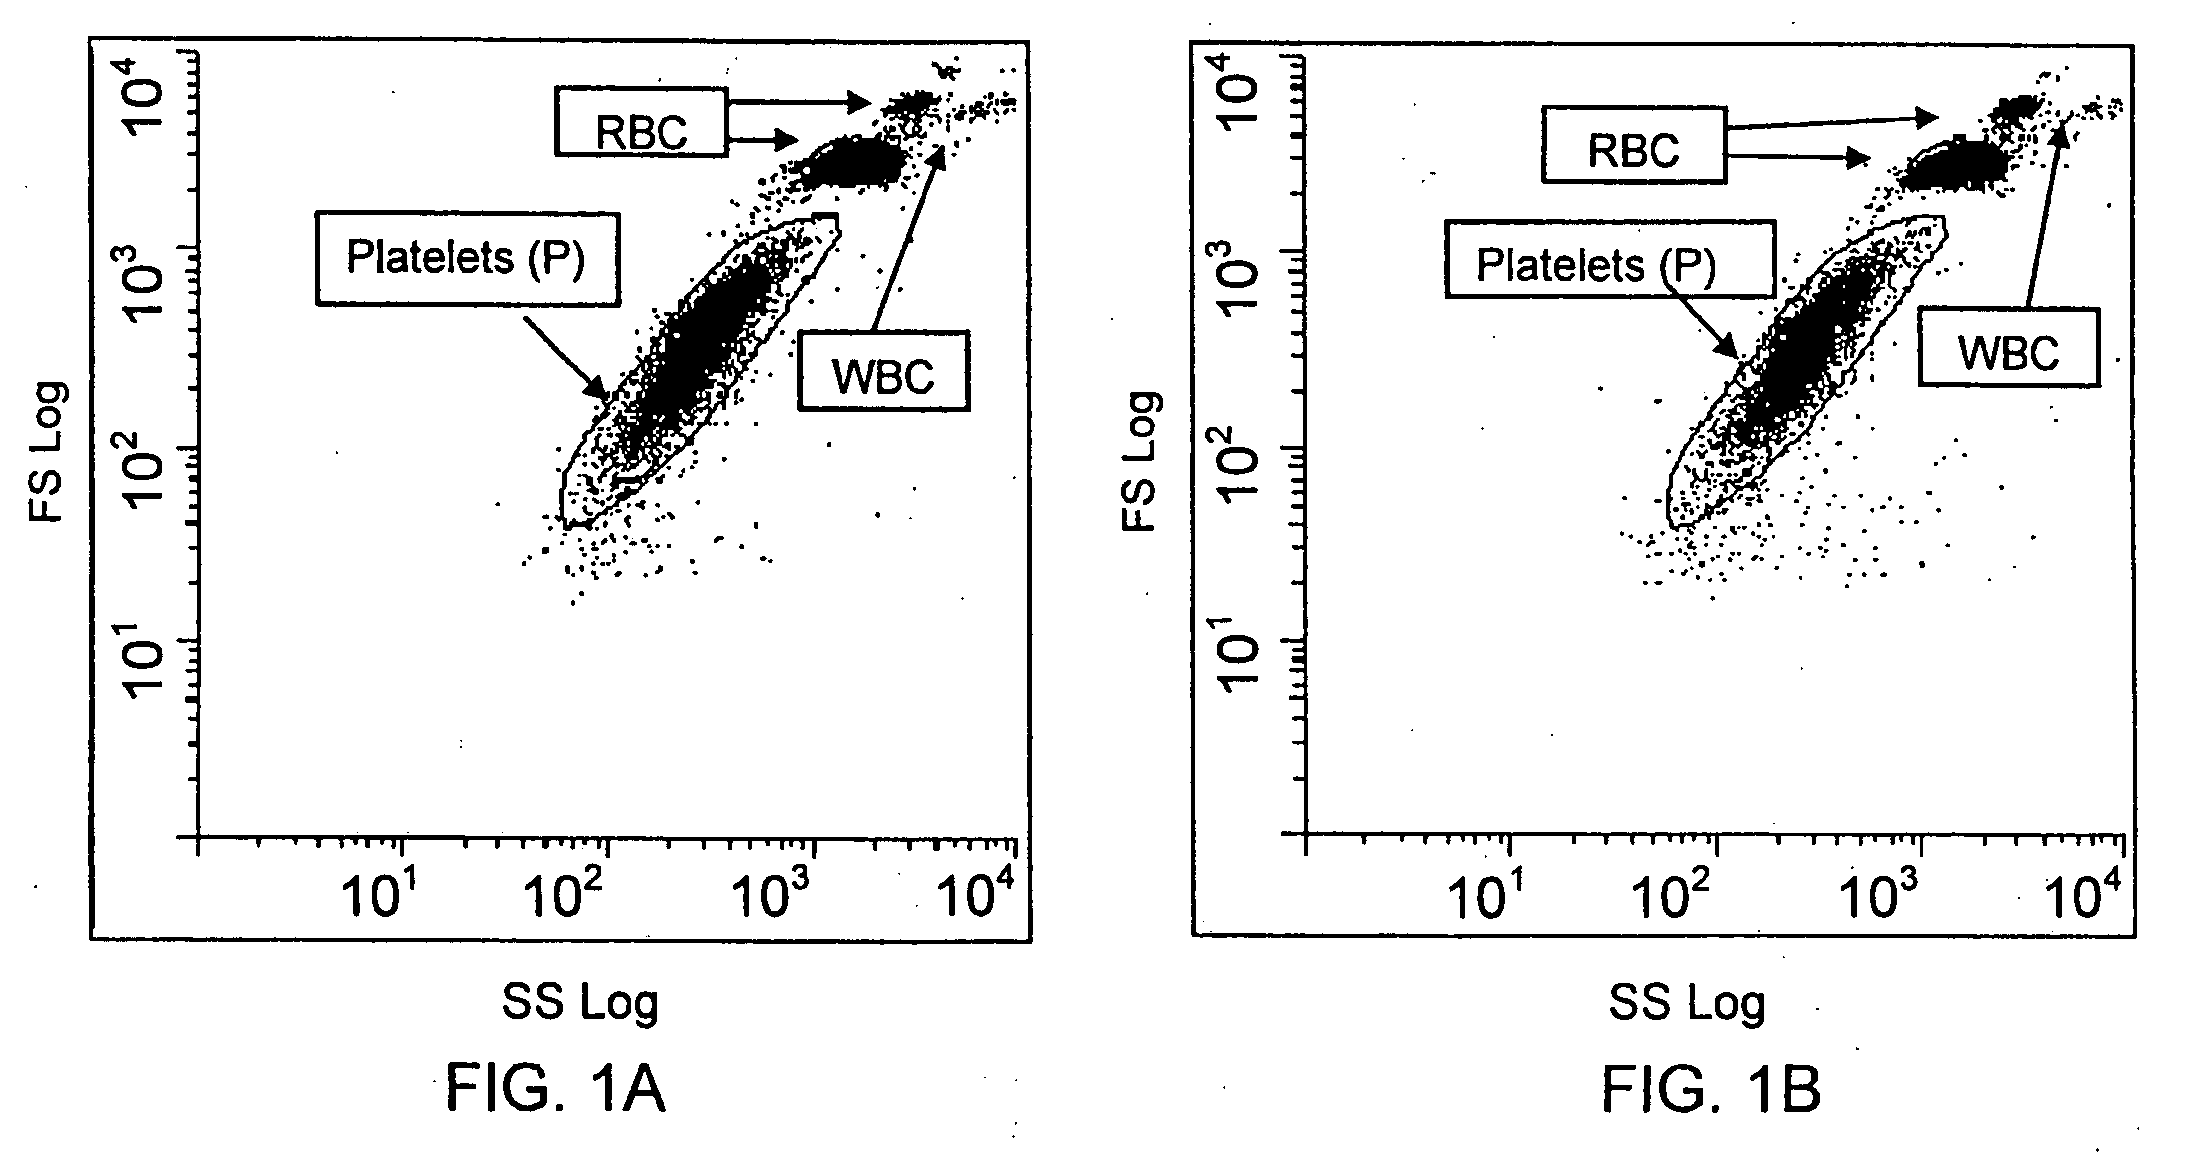 Method for a rapid antibody-based analysis of platelet populations